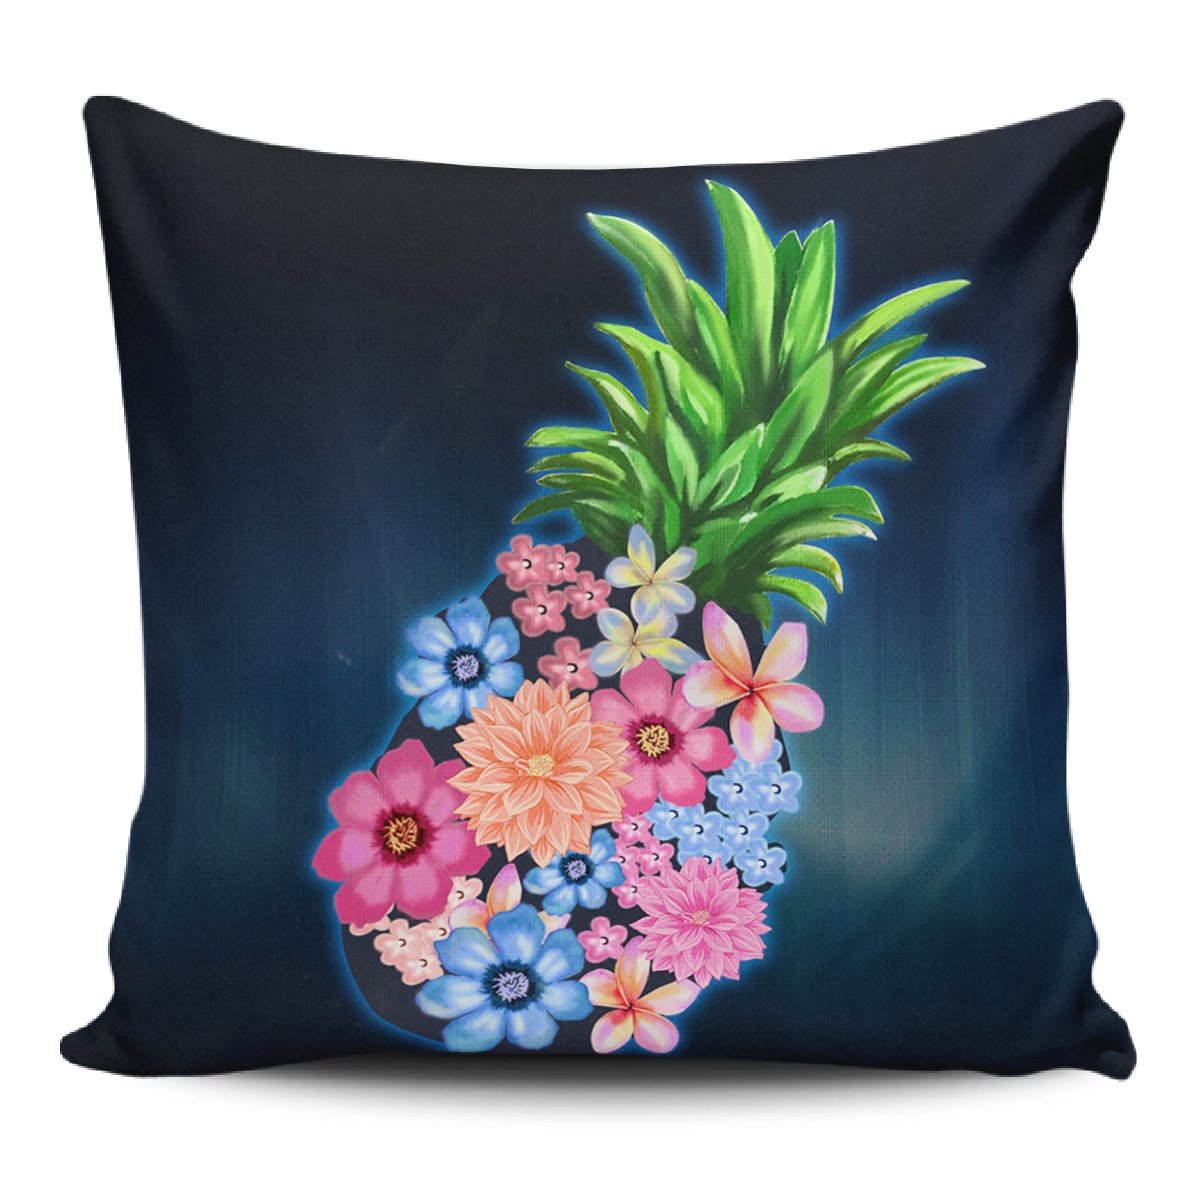 Pineapple Hibiscus Pattern Pillow Covers One Size Zippered Pillow Case 18"x18"(Twin Sides) Black - Polynesian Pride